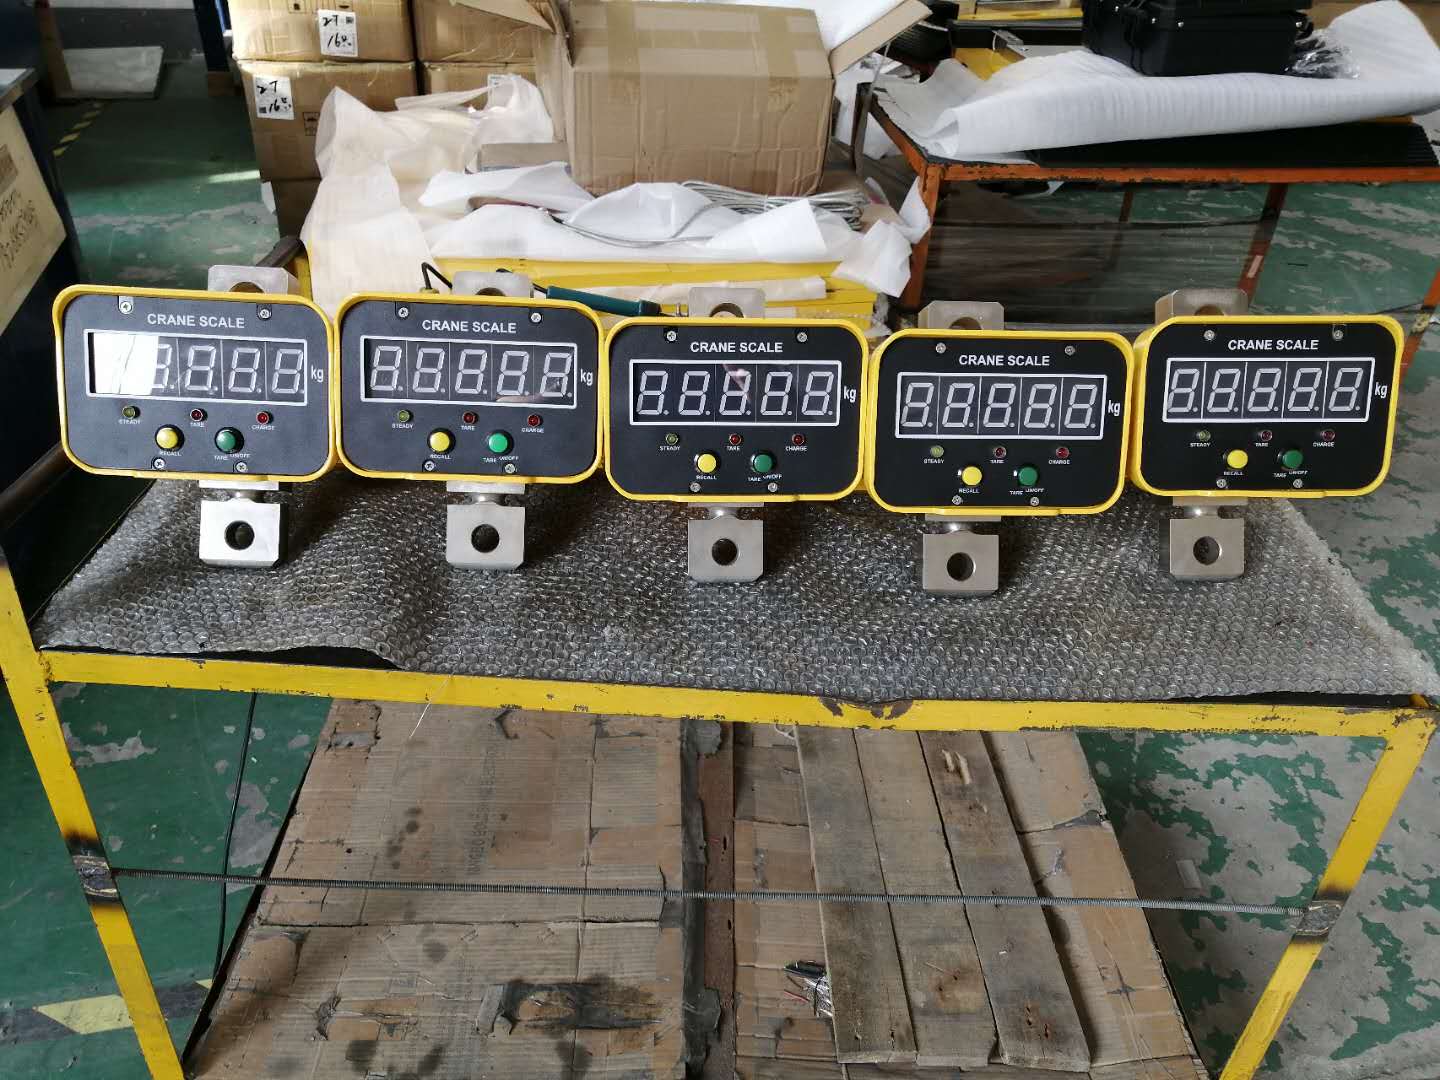 Site Photos of crane scale made in china by RAMHOIST.jpg